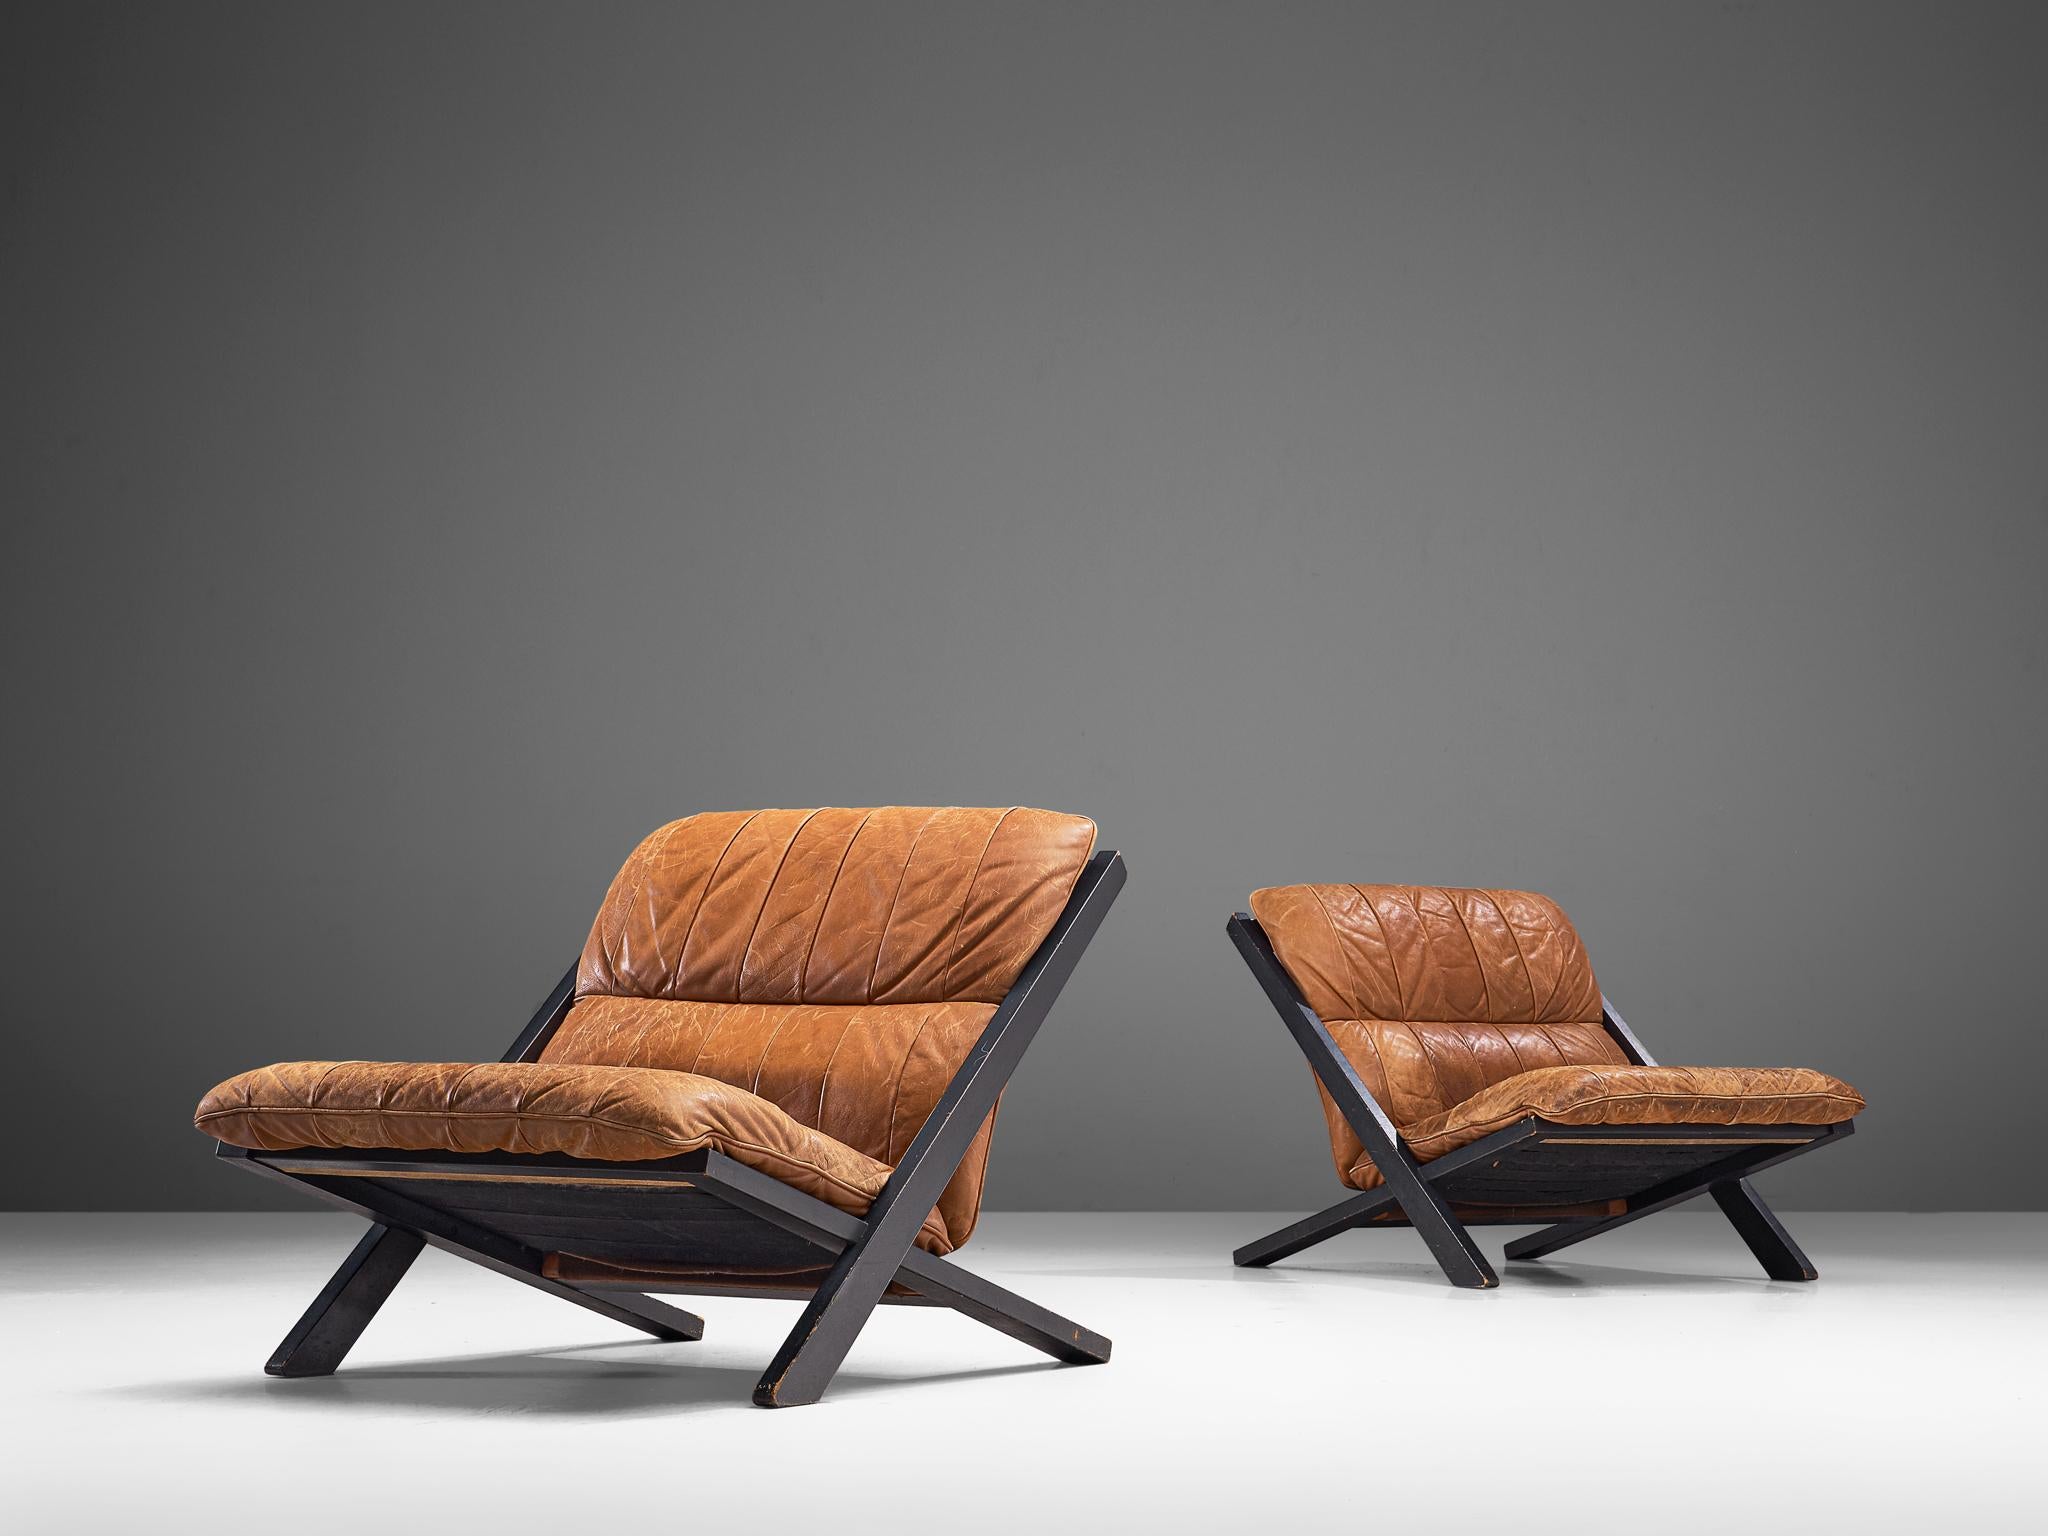 Ueli Berger for De Sede, pair of lounge chairs, wood and leather, Switzerland, 1970s.

High back lounge chairs by de Swiss quality manufacturer De Sede. The X-shaped frame consists of white lacquered wood. This makes an interesting contrast to the